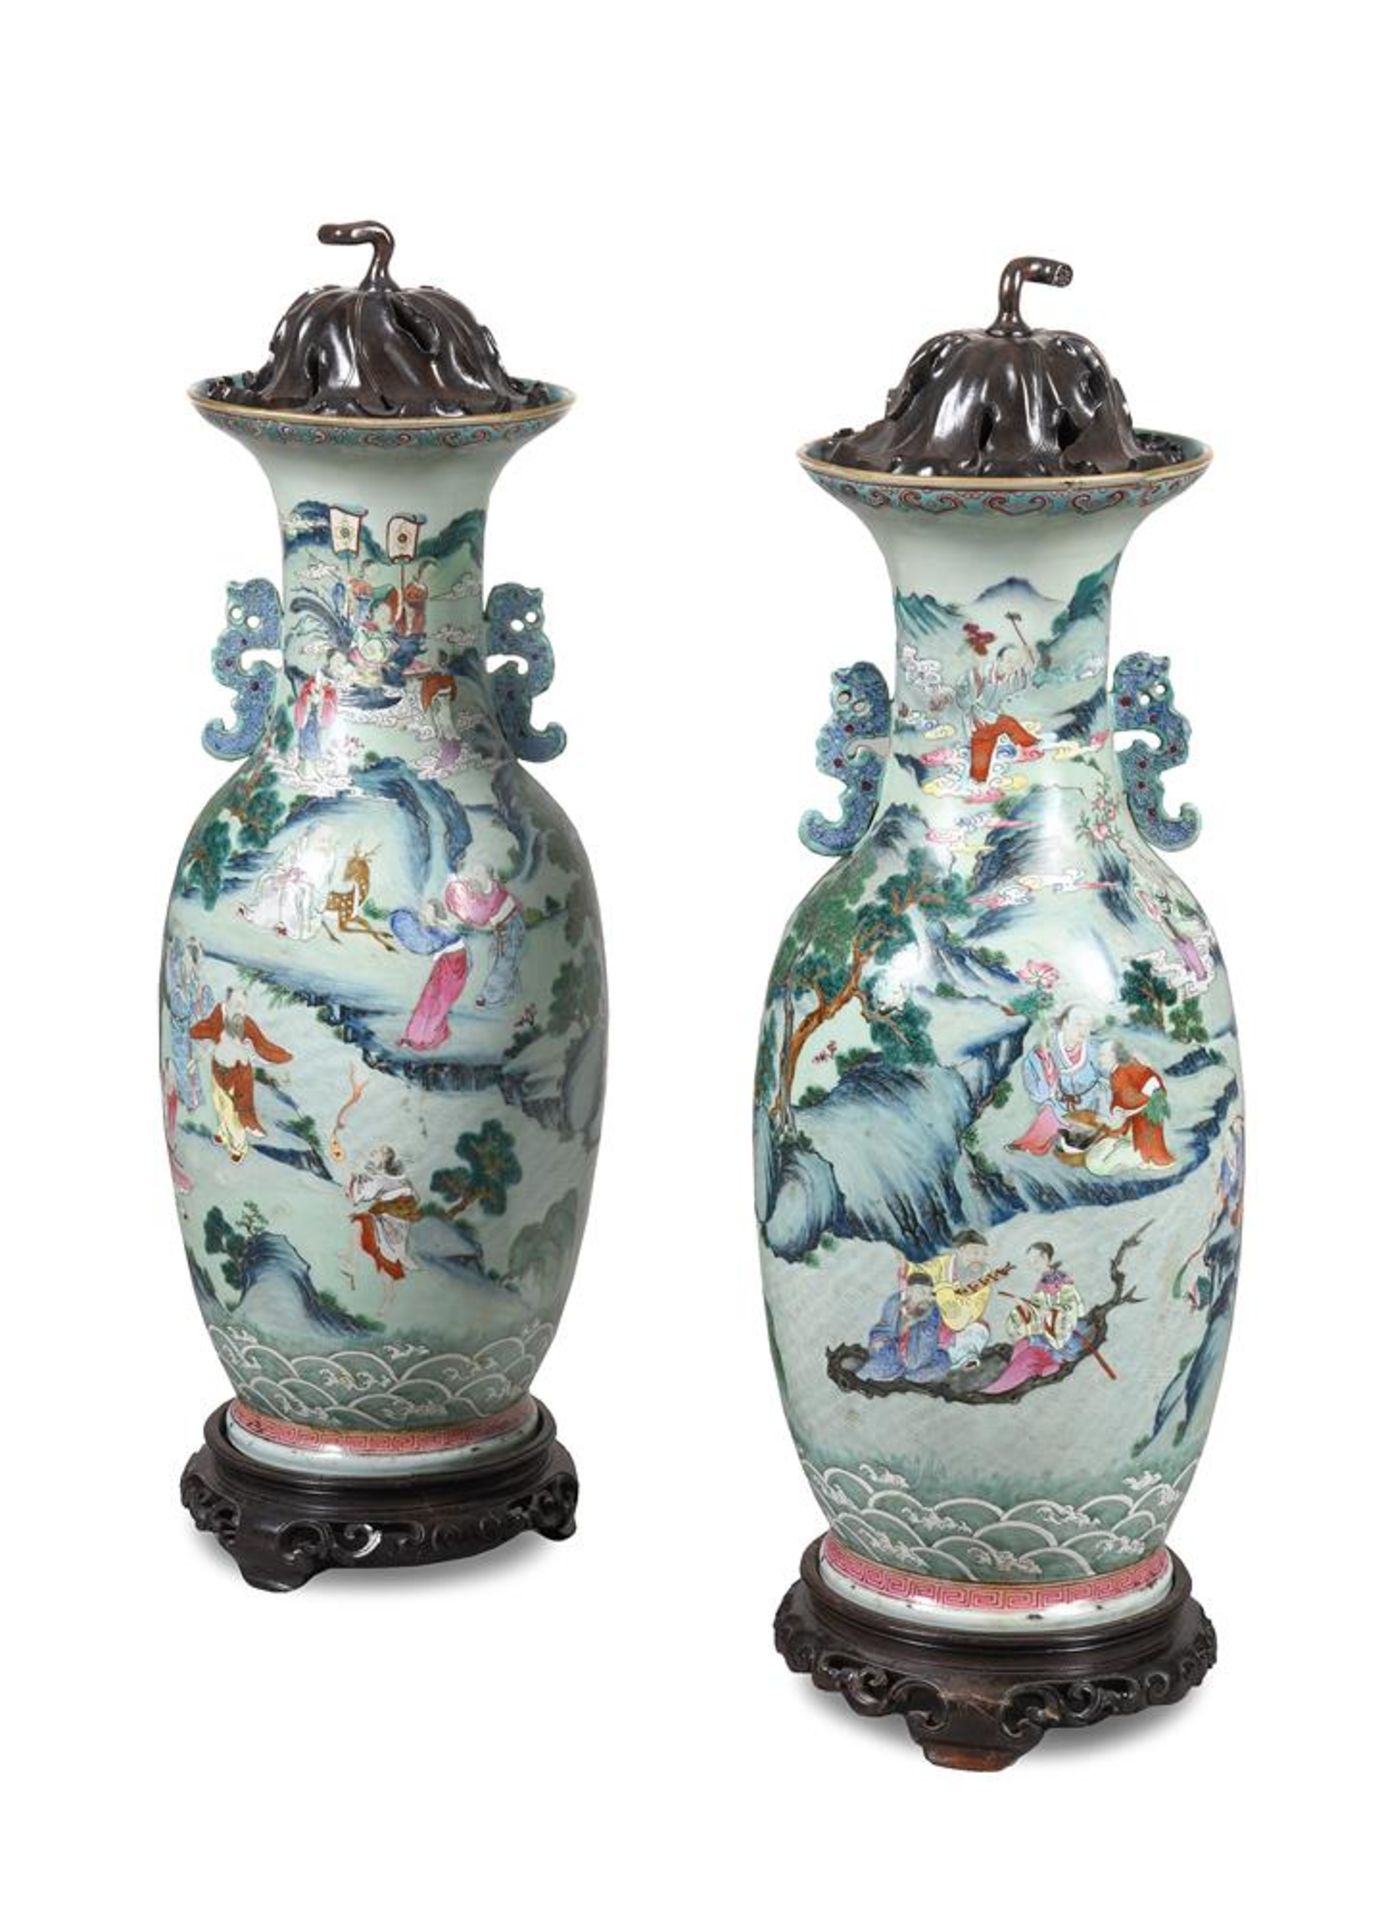 A pair of large Chinese Famille Rose 'Eight Immortals' baluster vases